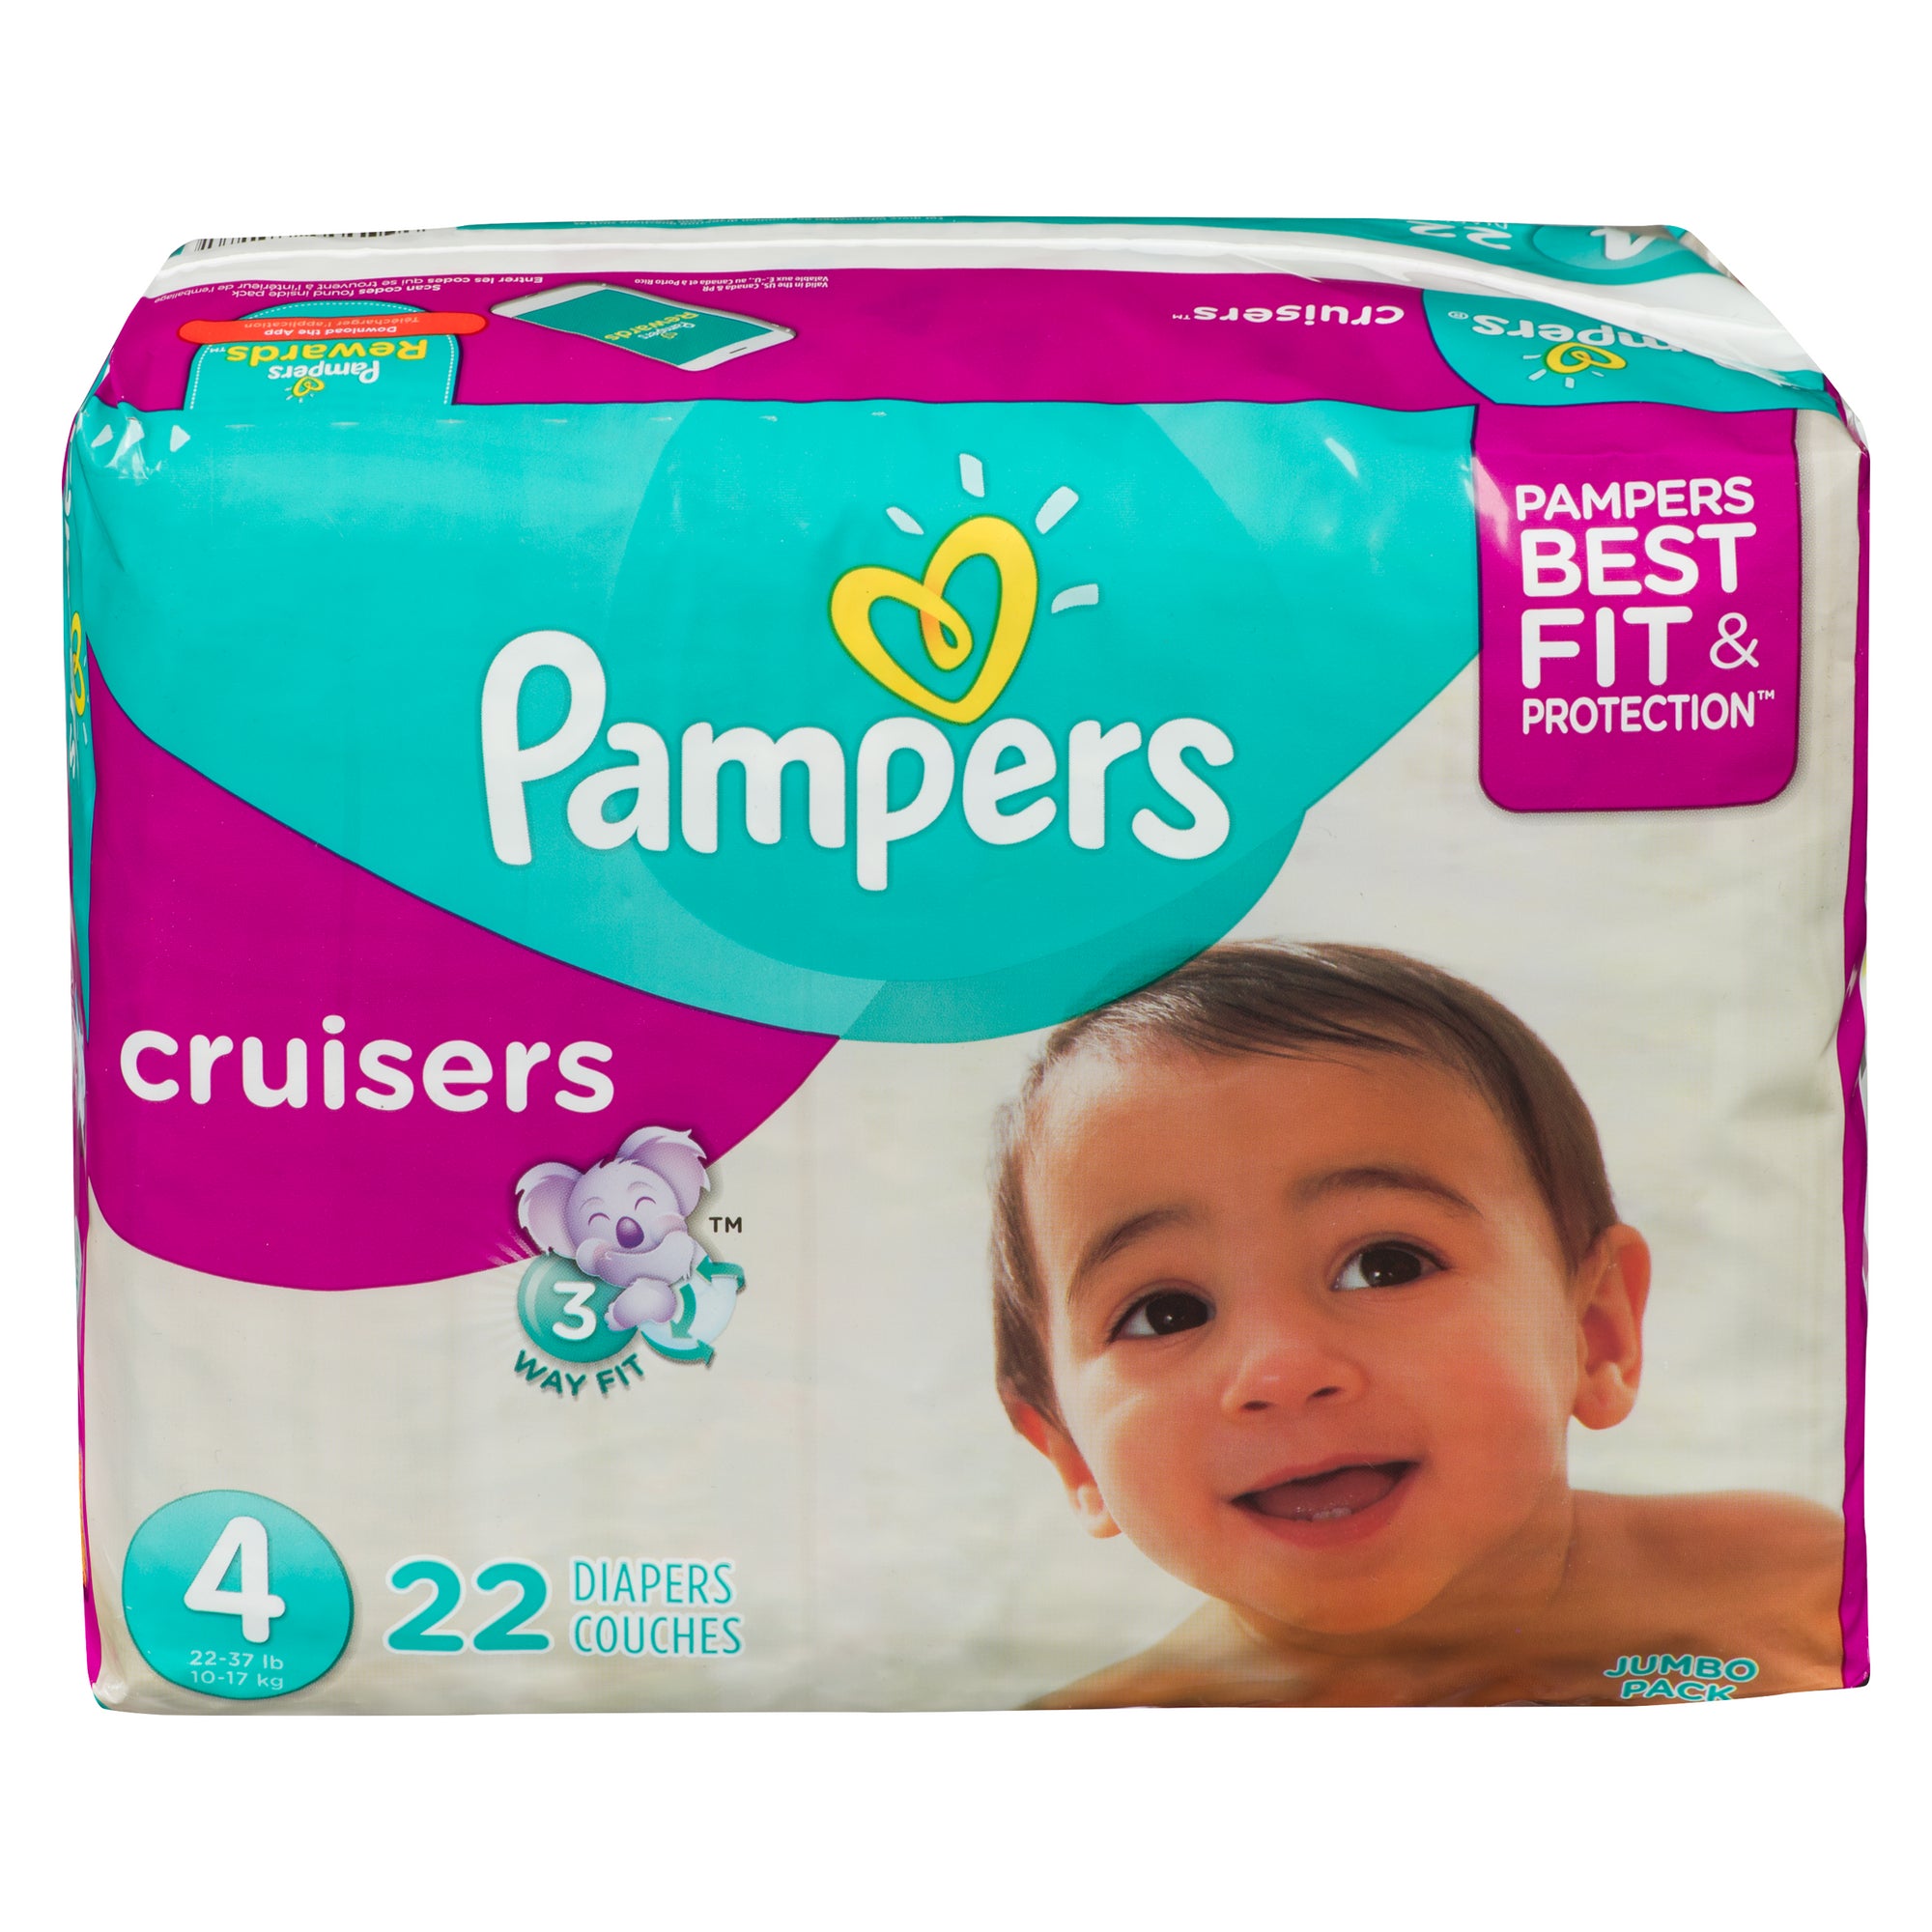 Pampers Cruisers Jumbo Diapers, 4, 22-Pack – Giant Tiger